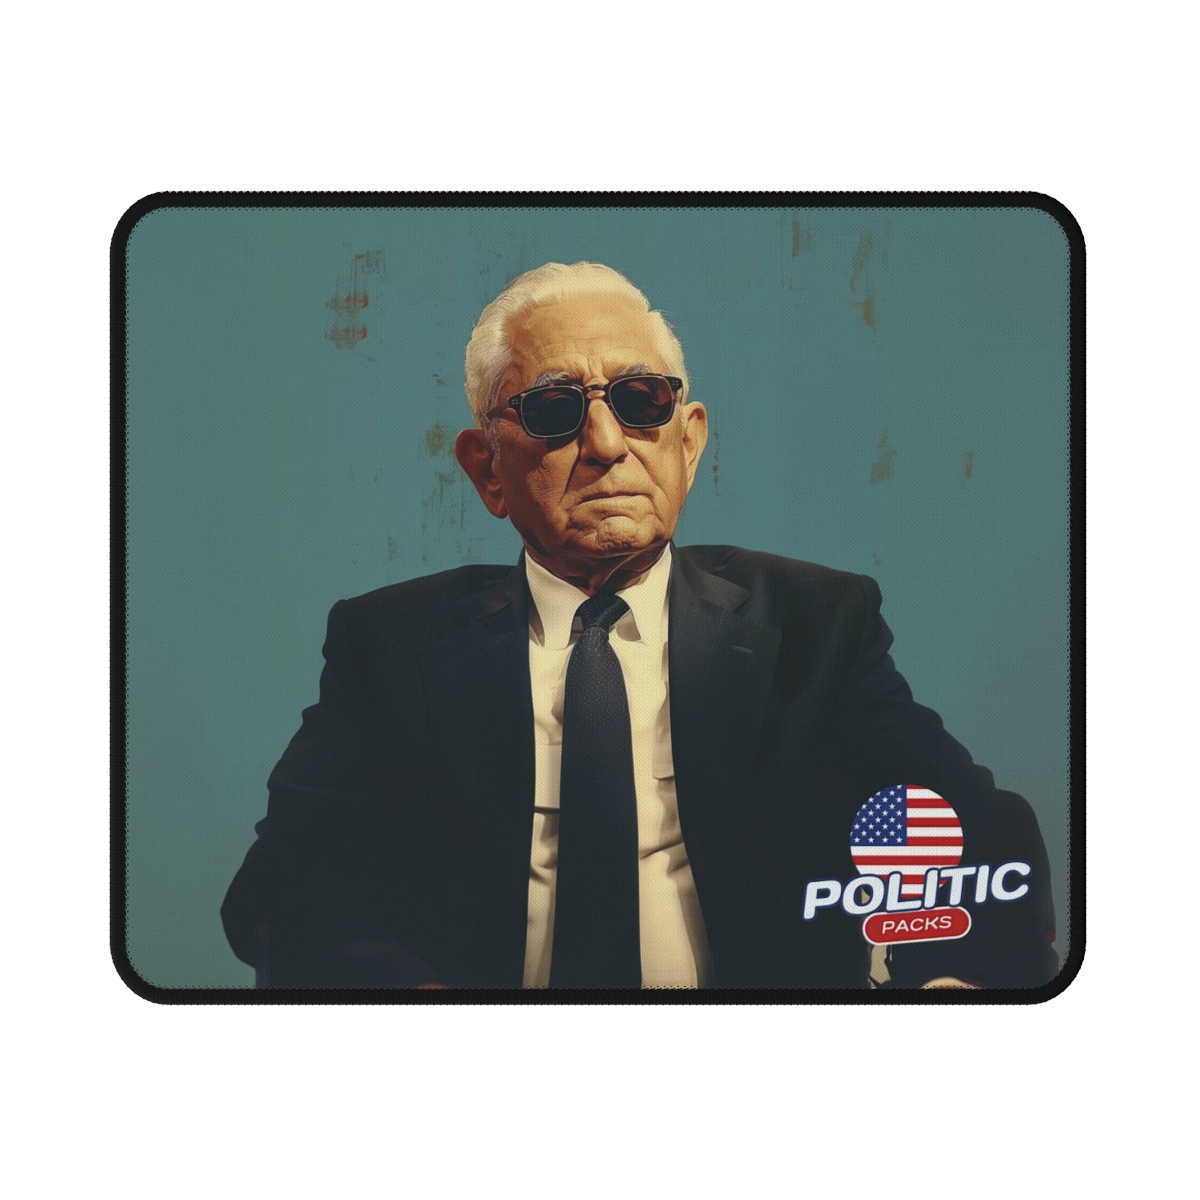 Henry Kissinger Legacy Mouse Pad – Politic Packs Edition